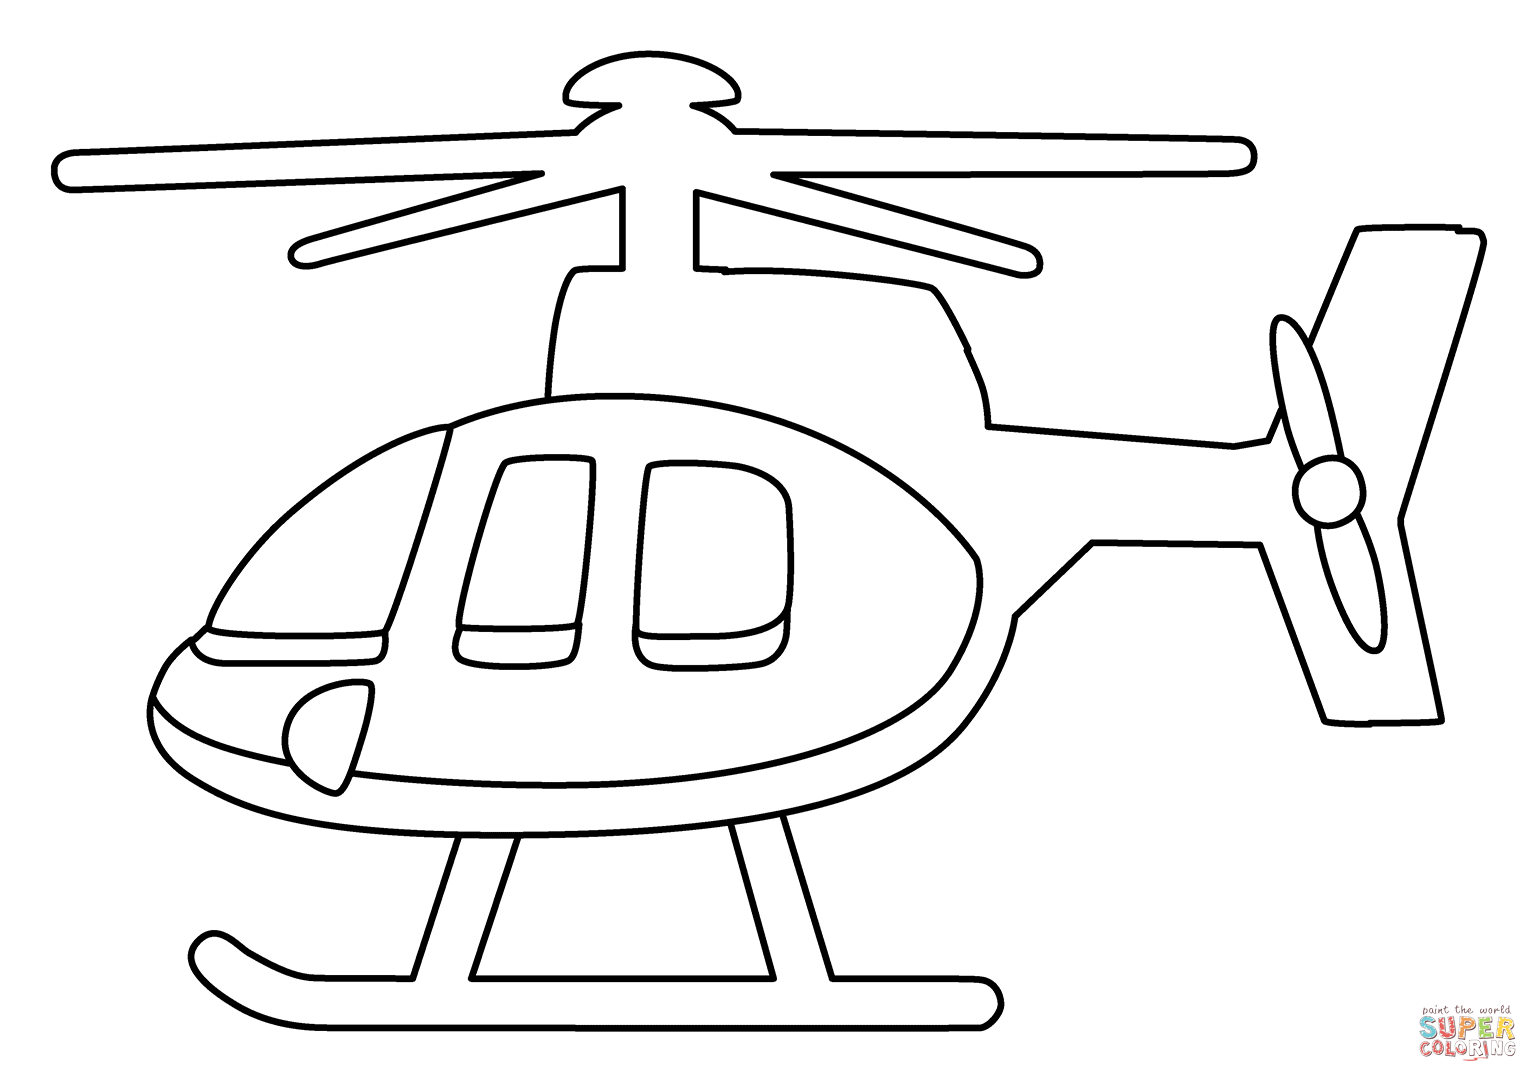 Helicopter emoji coloring page free printable coloring pages